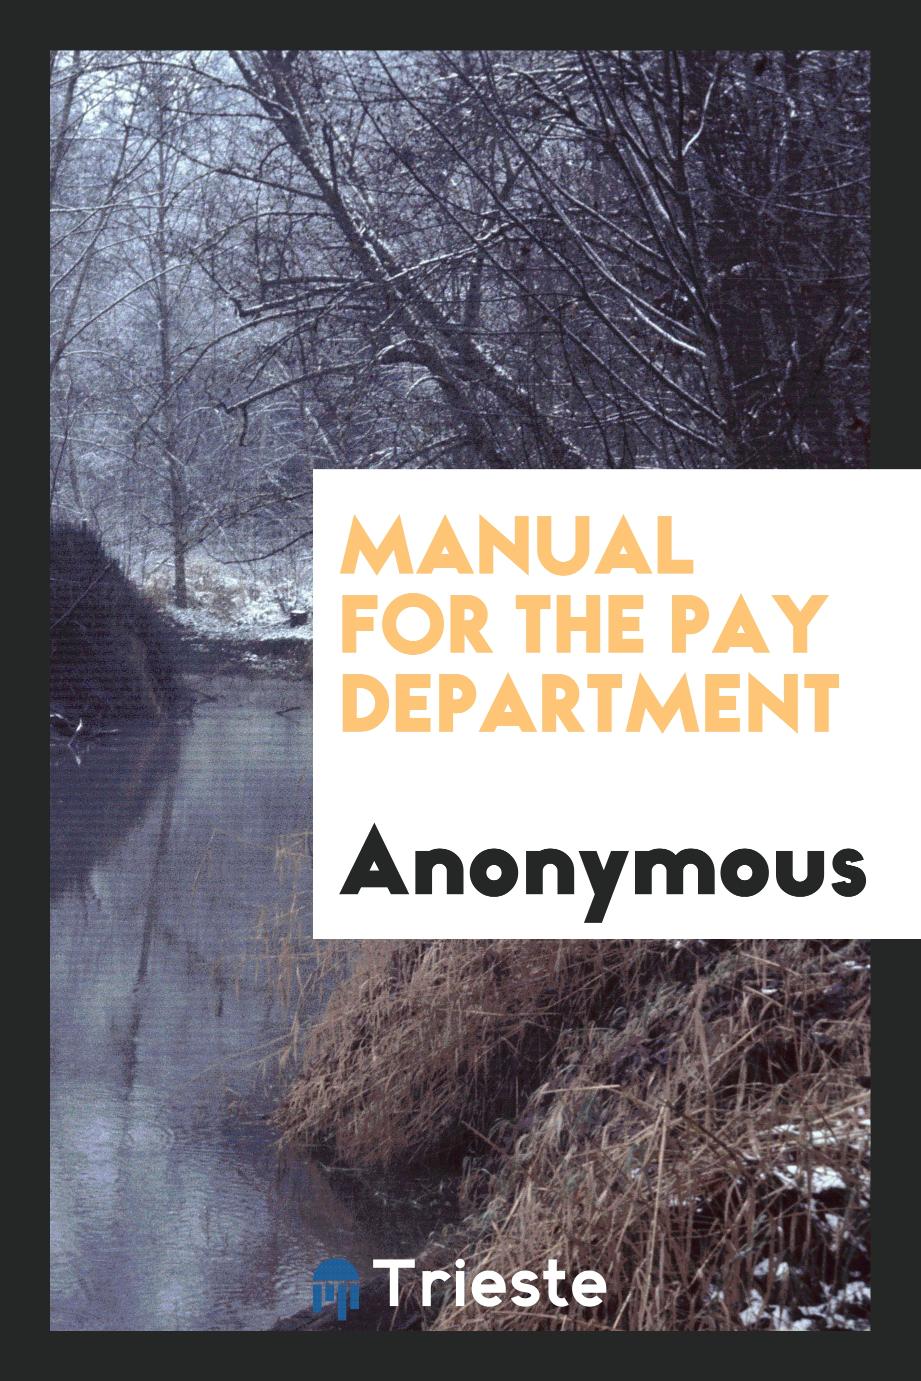 Manual for the pay department